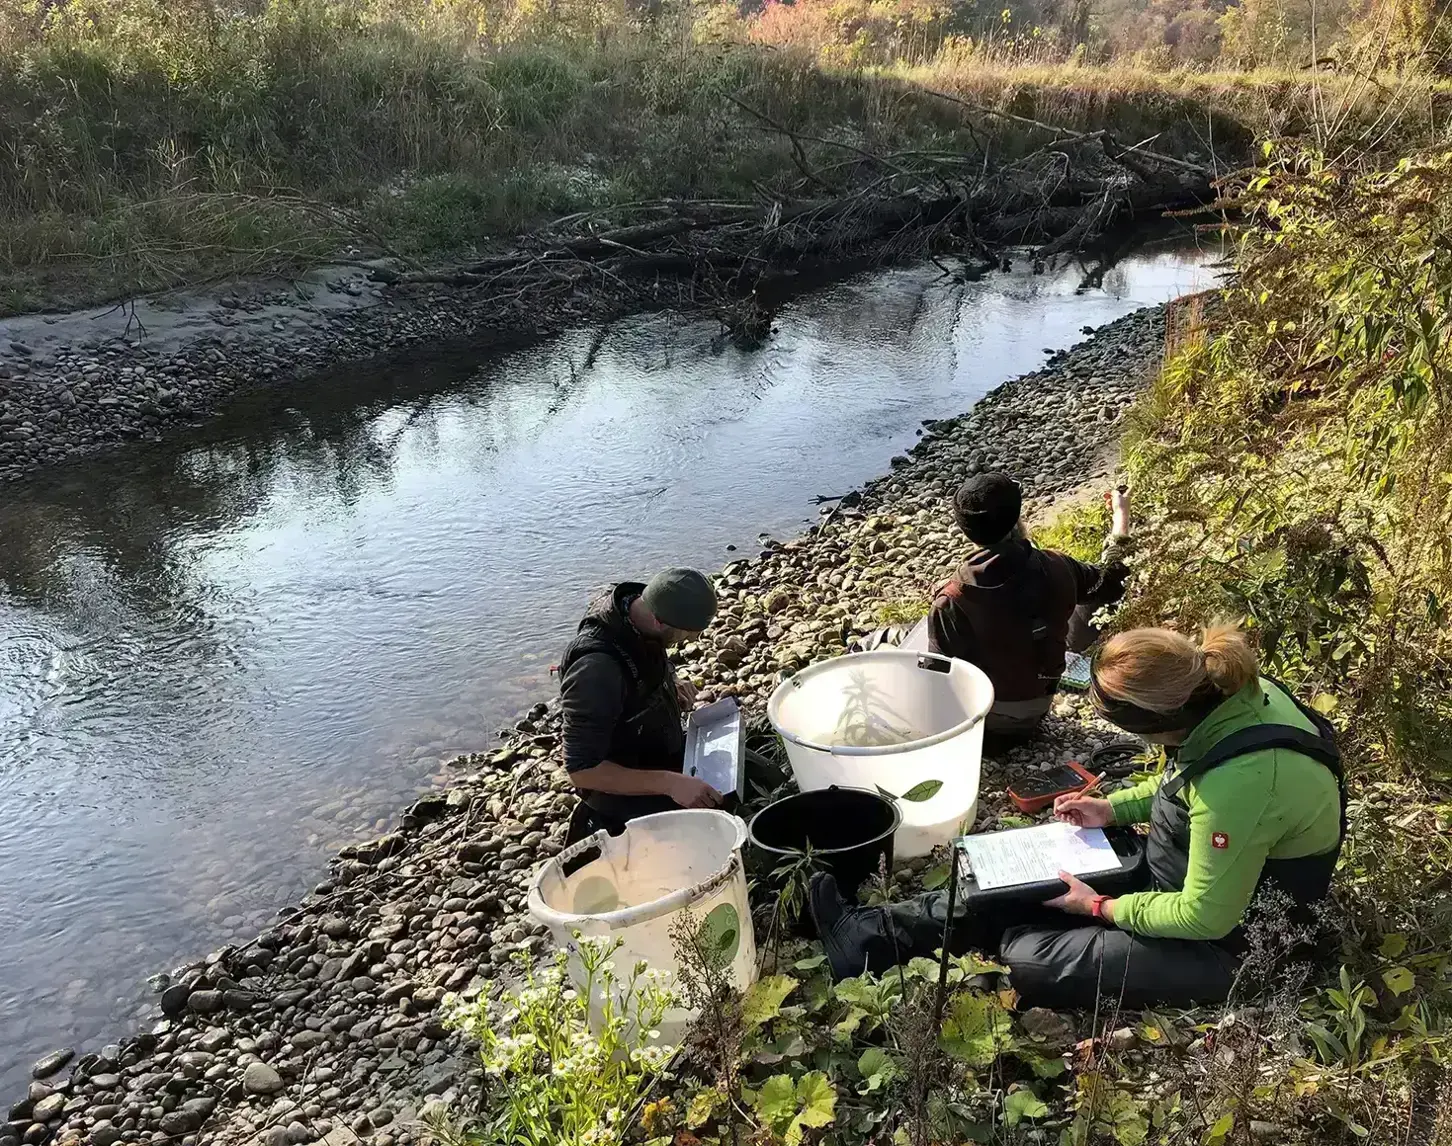 Some young people are monitoring fish on the banks of the river. The setting is autumnal.